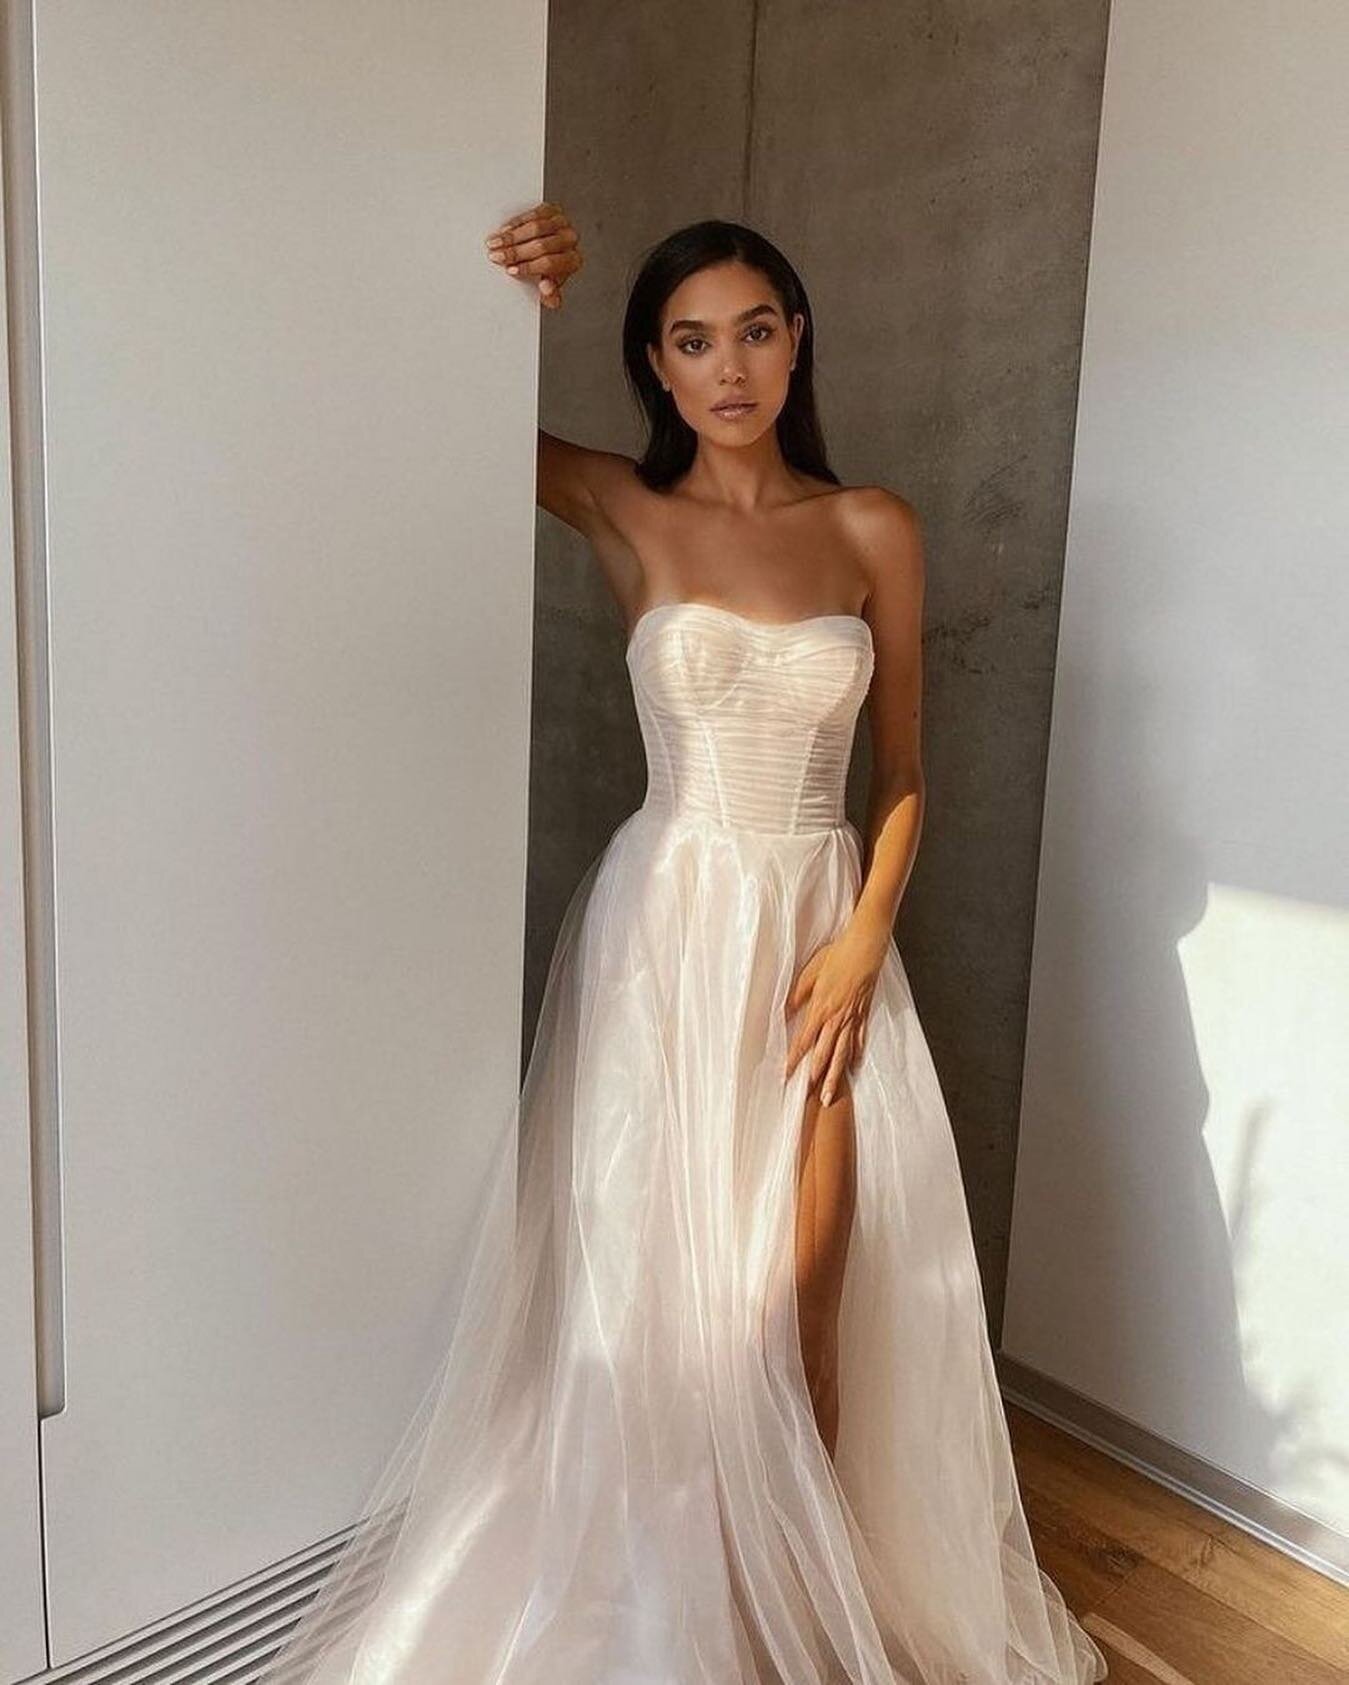 This Gala 501 dress by Galia Lahav @gl__gala is fit for a fairytale.✨⁠ ⁠
⁠
We're in love with the romance of the fabric paired with the high slit...we want to know, would you wear your hair up or down with this gown? Cast your vote in the comments ⬇️